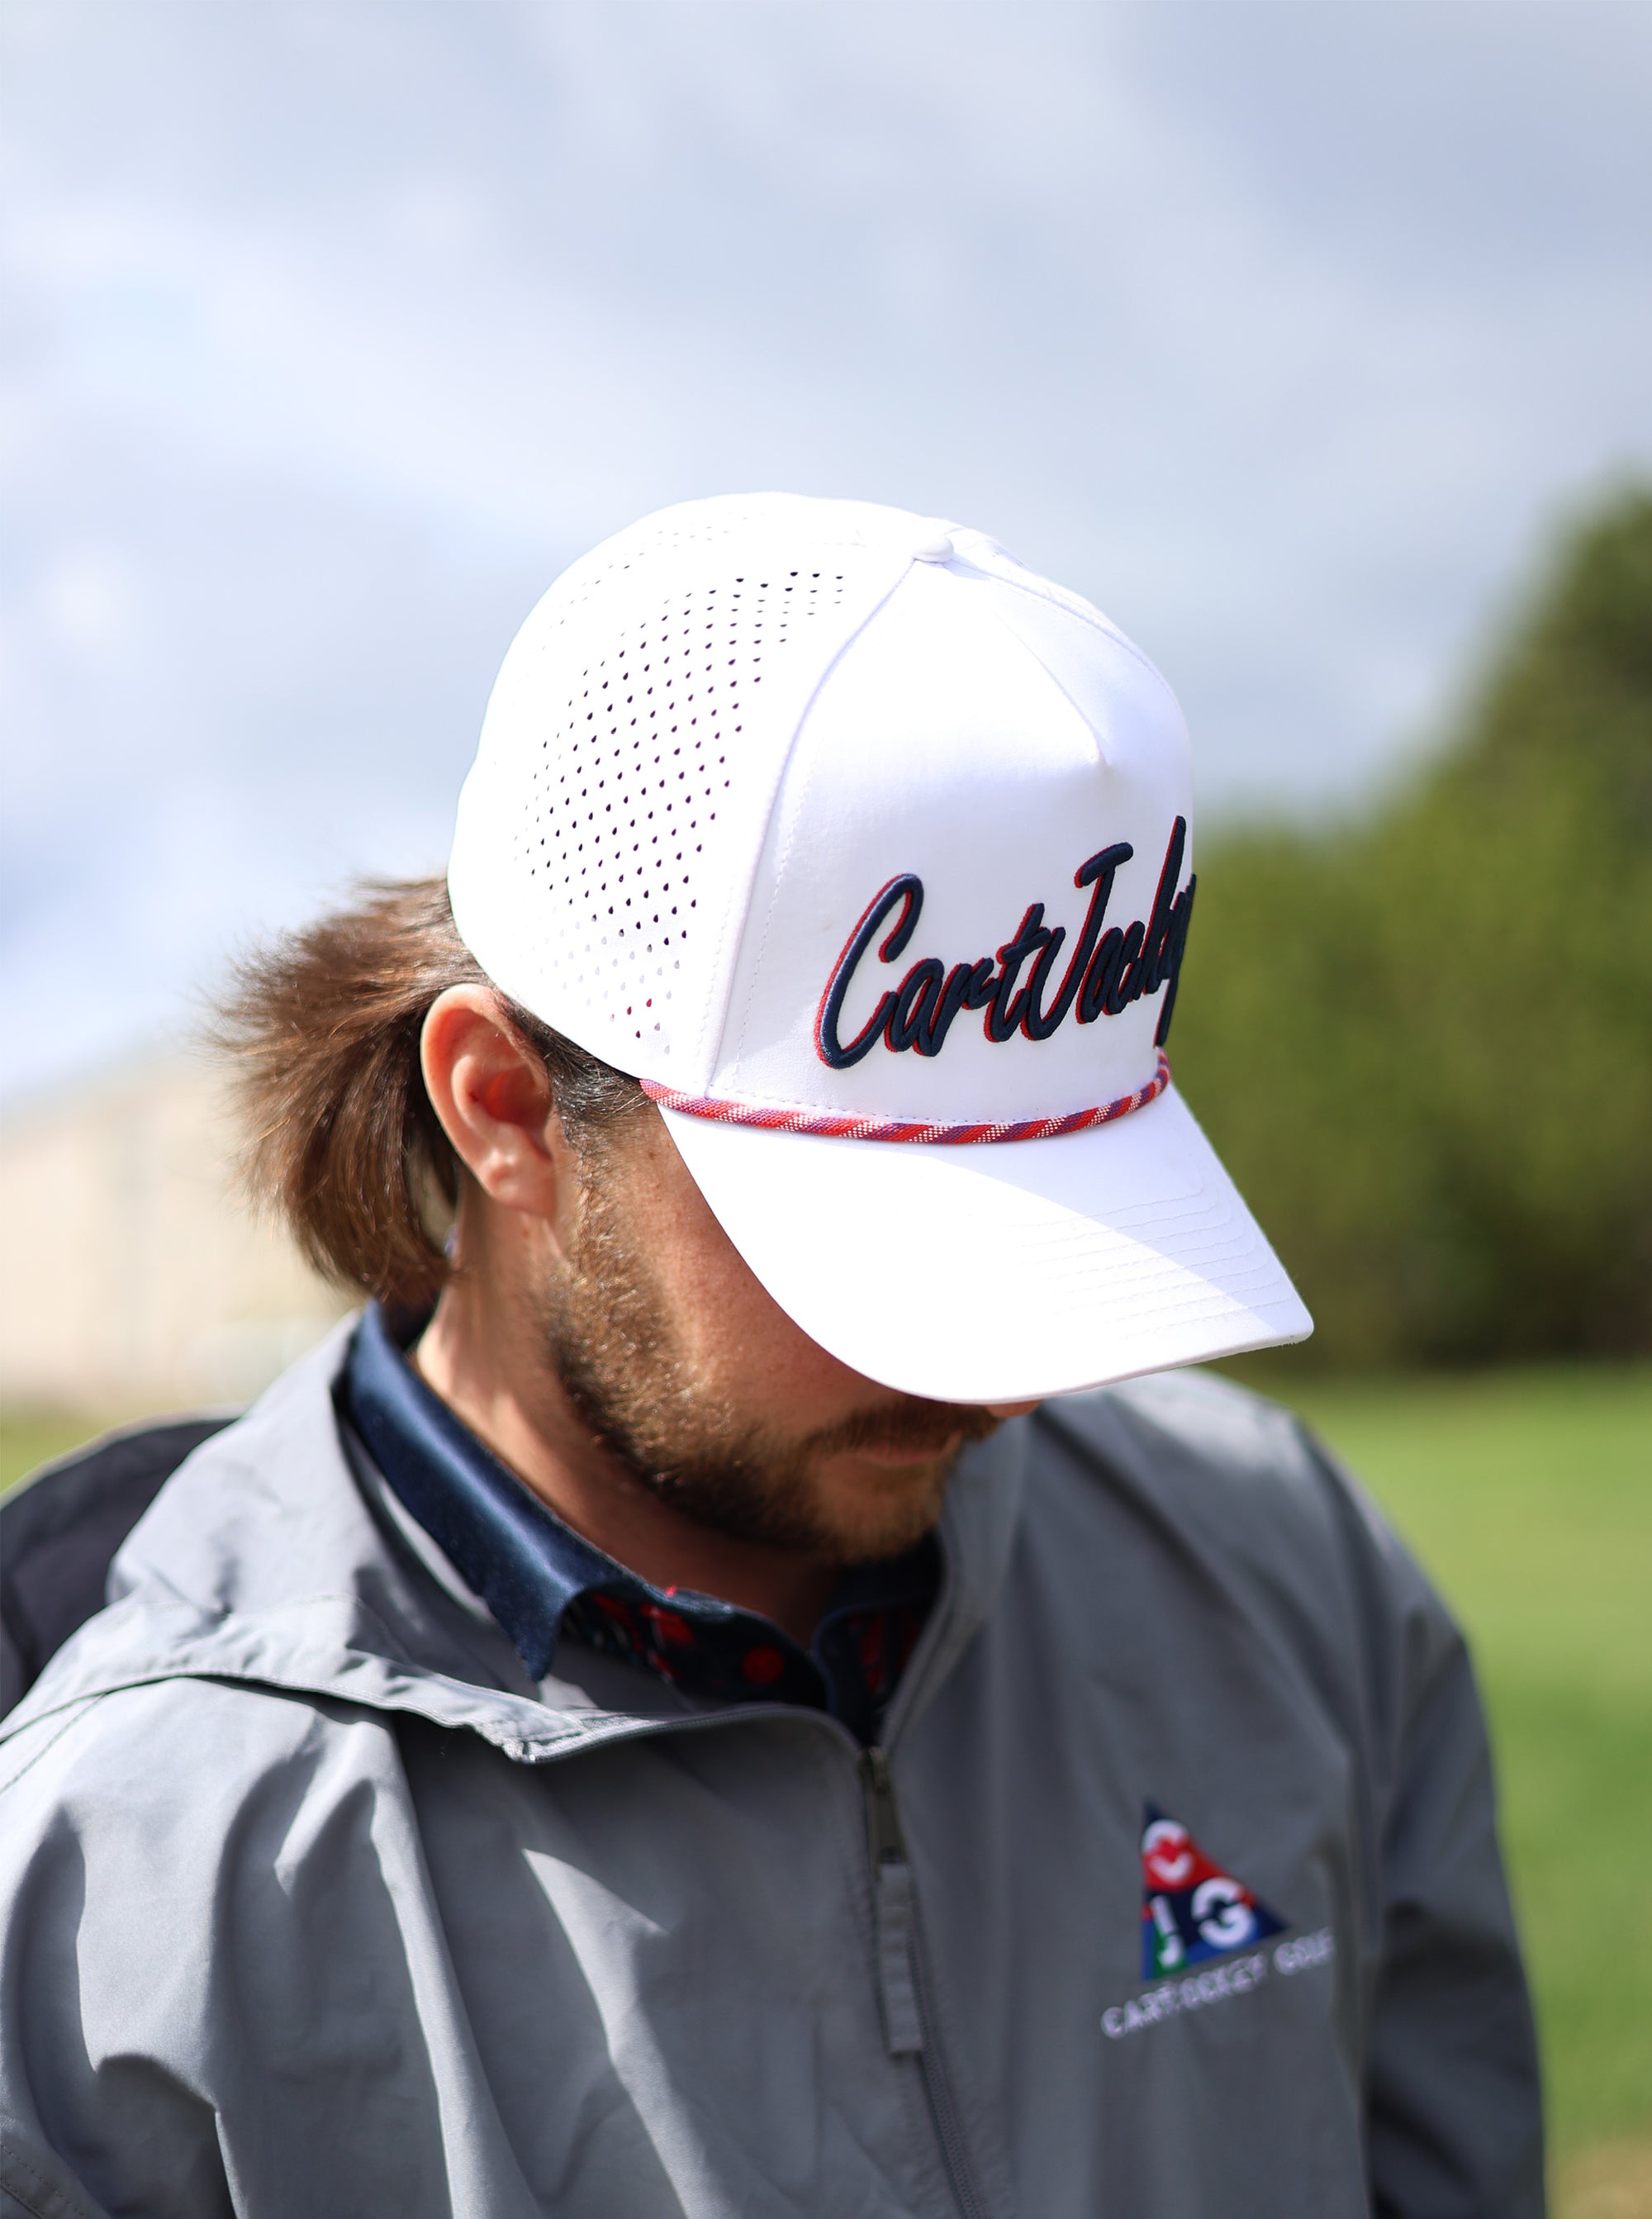 a man is wearing a hat with the word cortland on it.